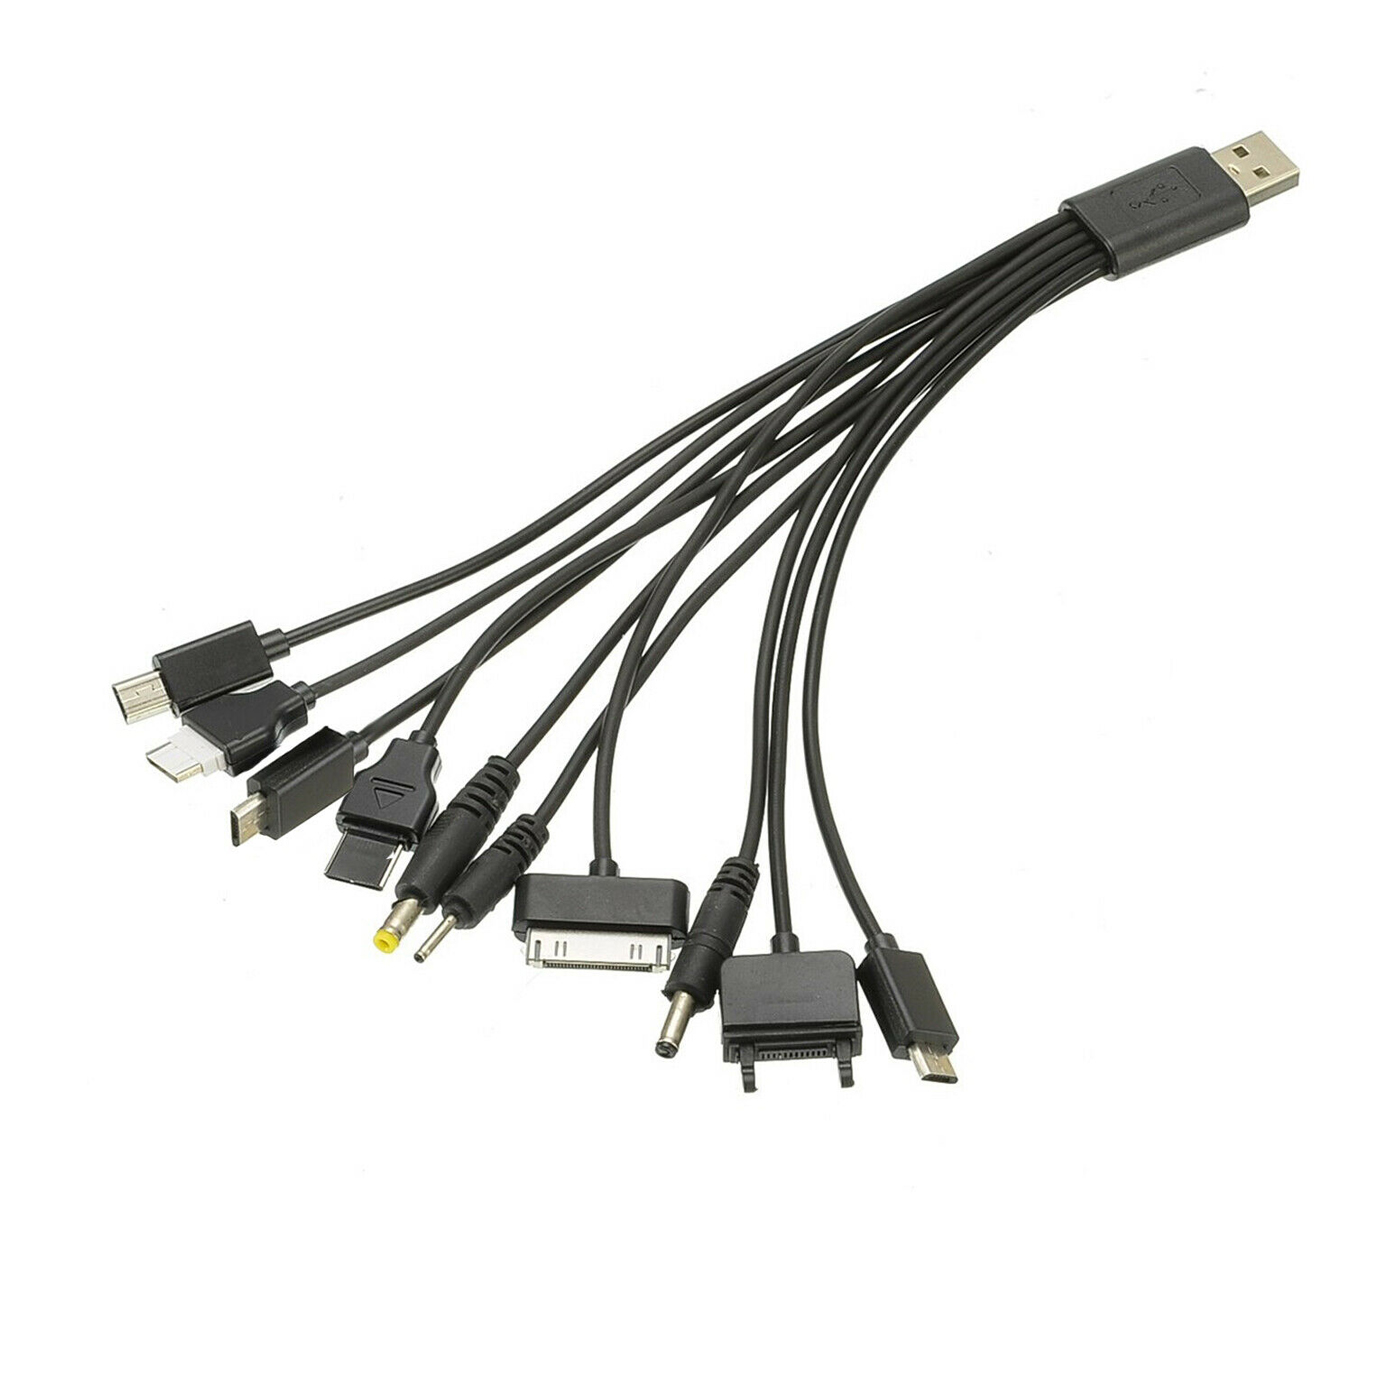 10 in 1 Universal USB Charger Cable Multifunction Charging Sync Cord for iPod iPhone PSP Camera Nokia BlackBerry,Data Line